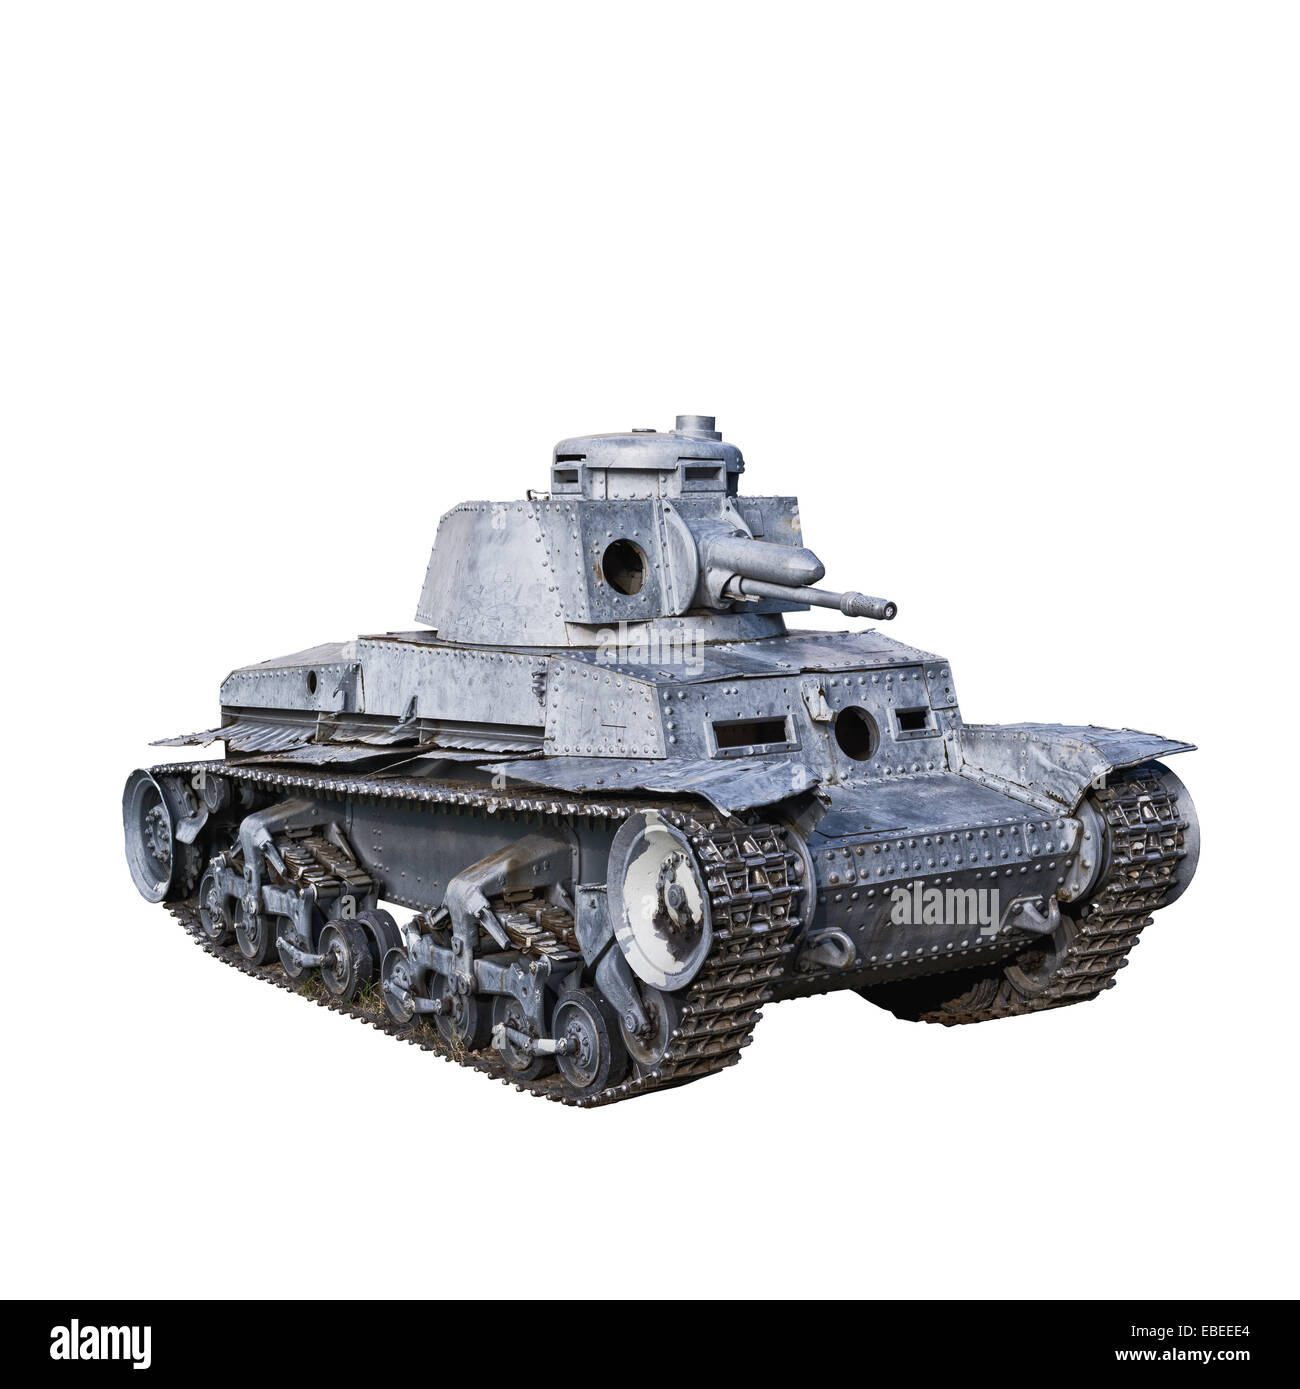 Panzer 35t, German Light Tank was used mainly by Nazi Germany during World War II. Isolated on White background. Stock Photo